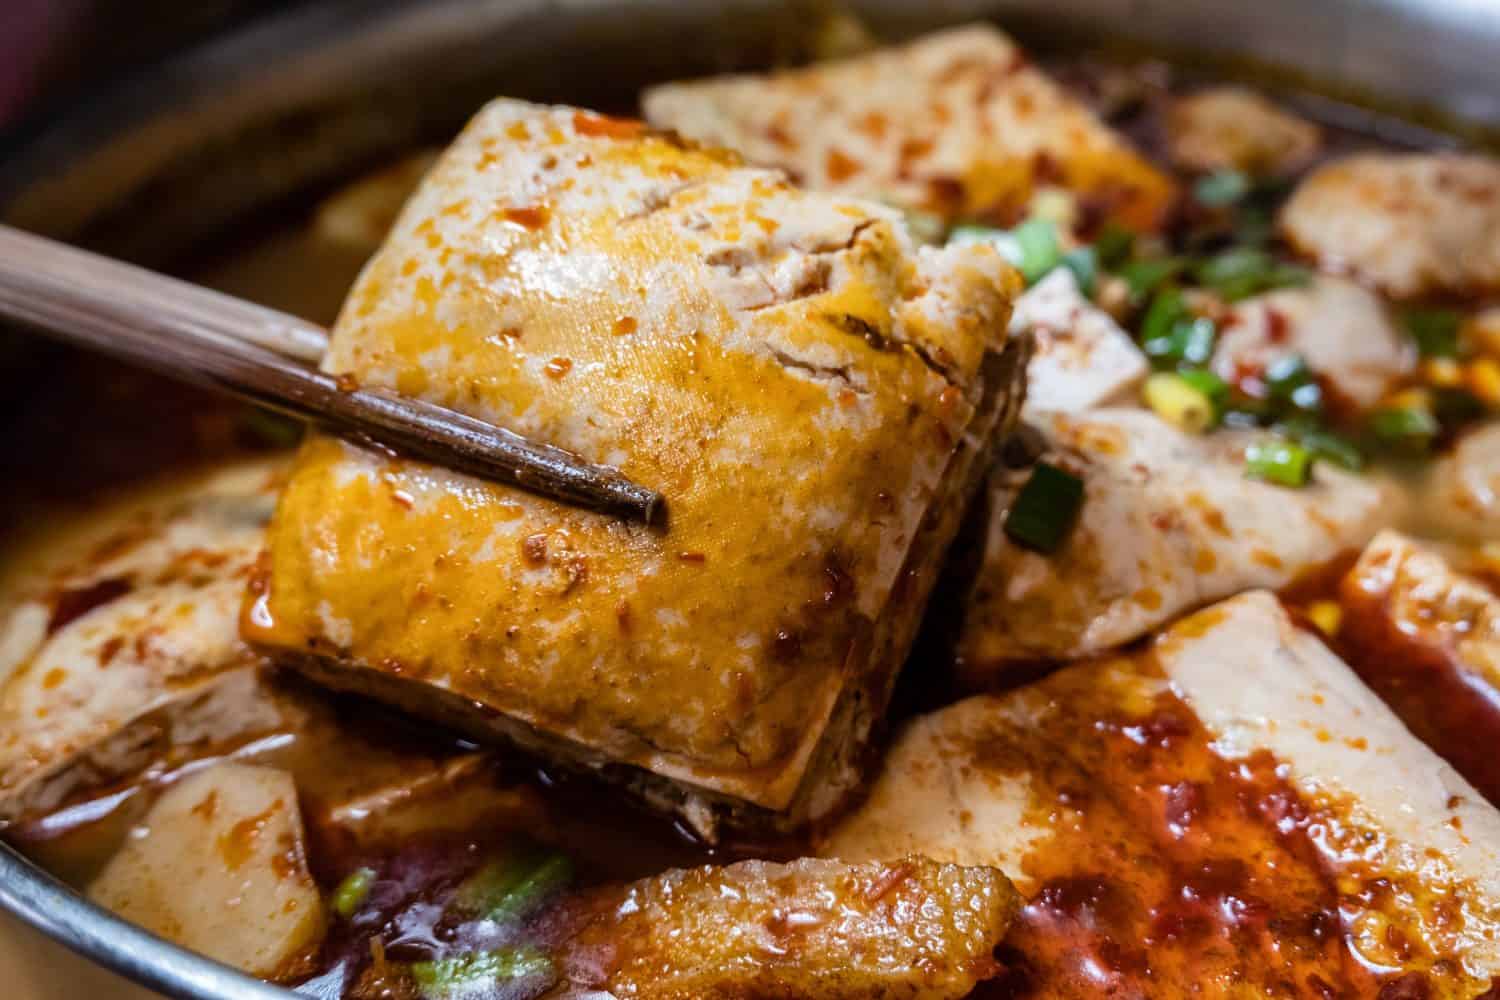 Stinky tofu hotpot is a famous Taiwanese street food known for its unique smell and flavor. It is a popular choice among locals and tourists alike, especially during the colder months.